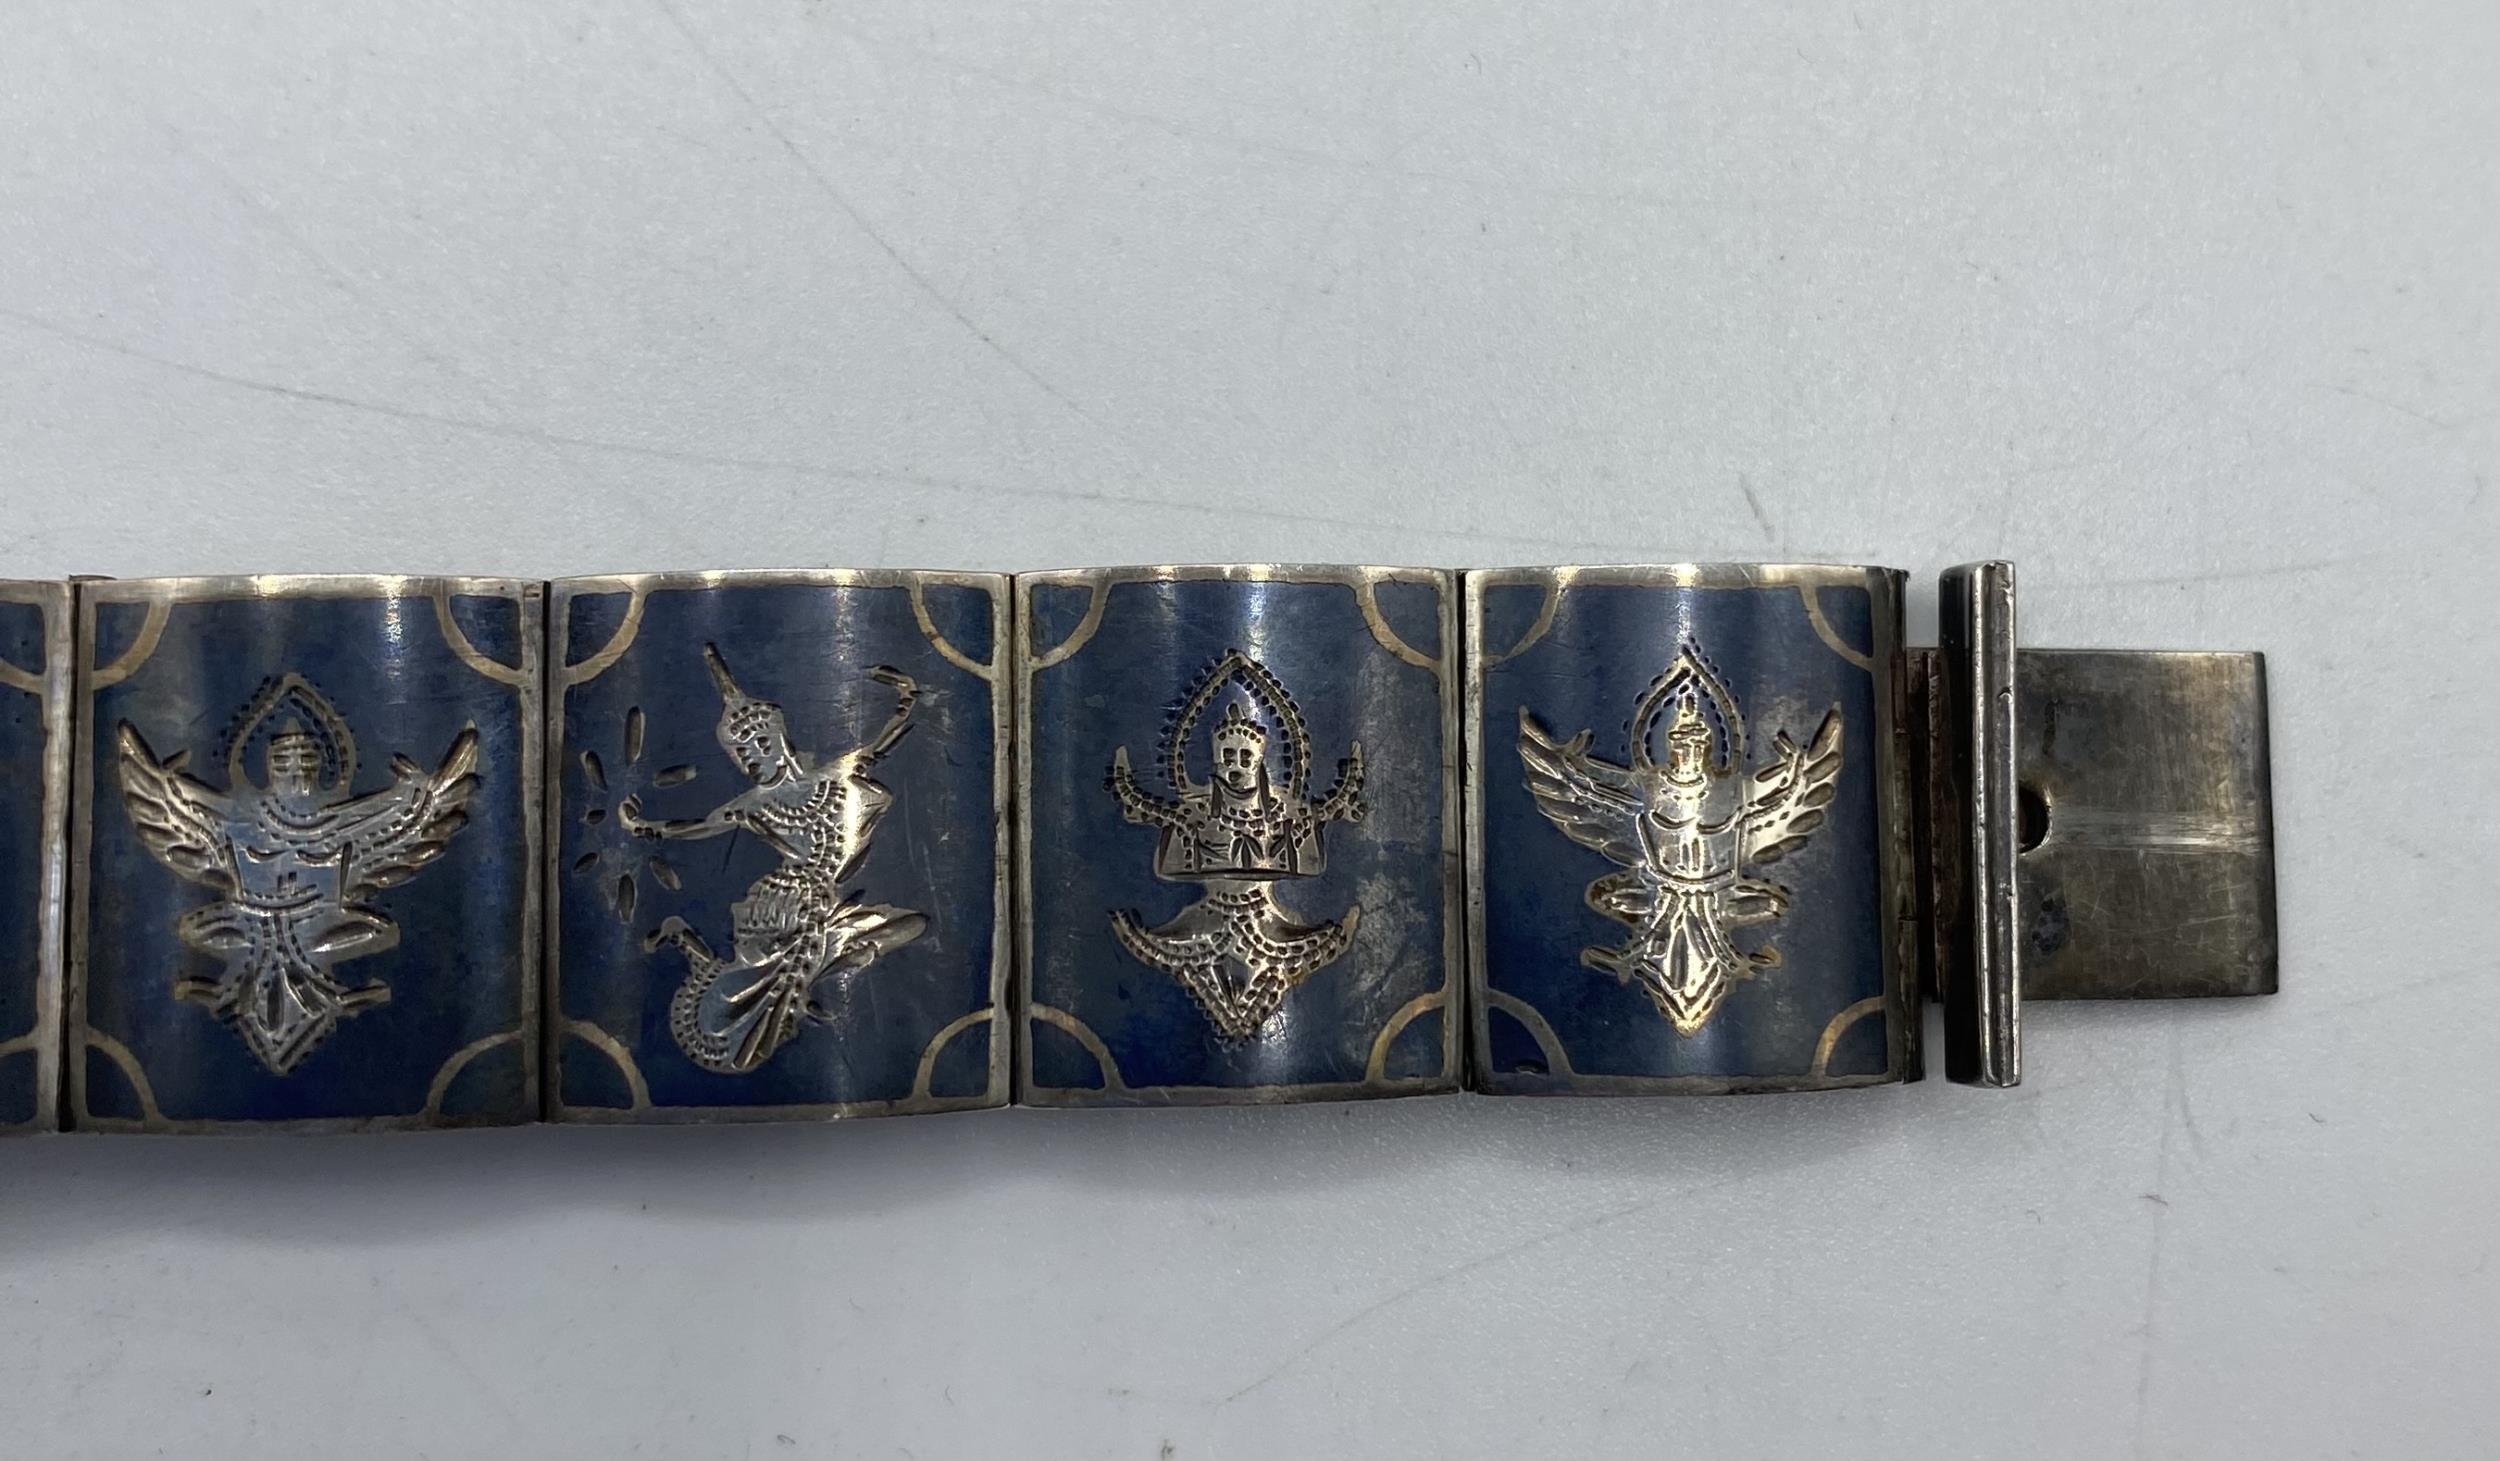 A Japanese Cloisonné belt buckle, Meiji Period together with a Siam silver panel bracelet. - Image 3 of 5